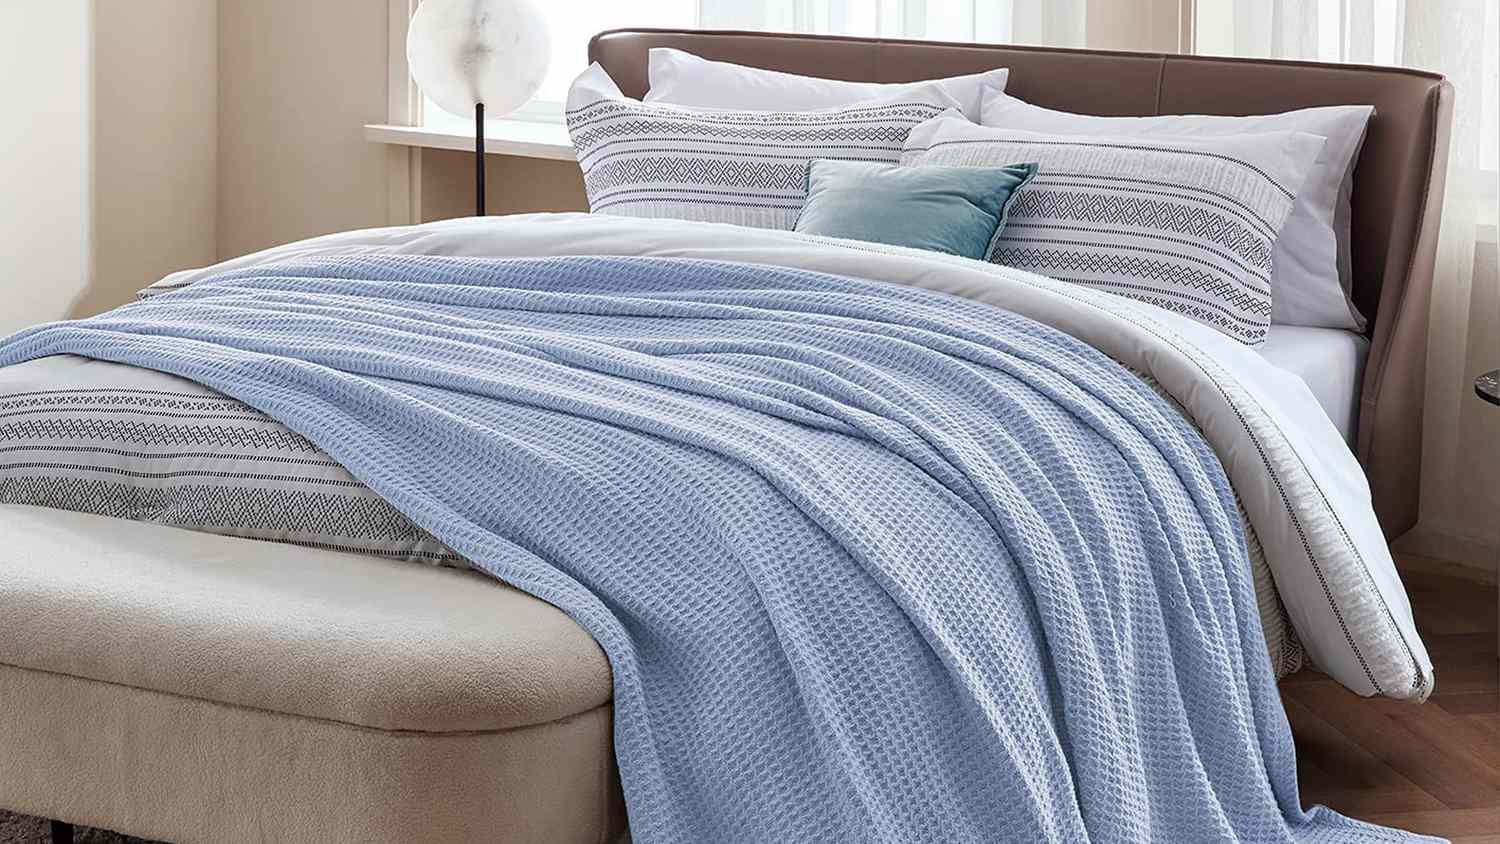 Bedsure 100 Cotton Blankets Queen Size for Bed